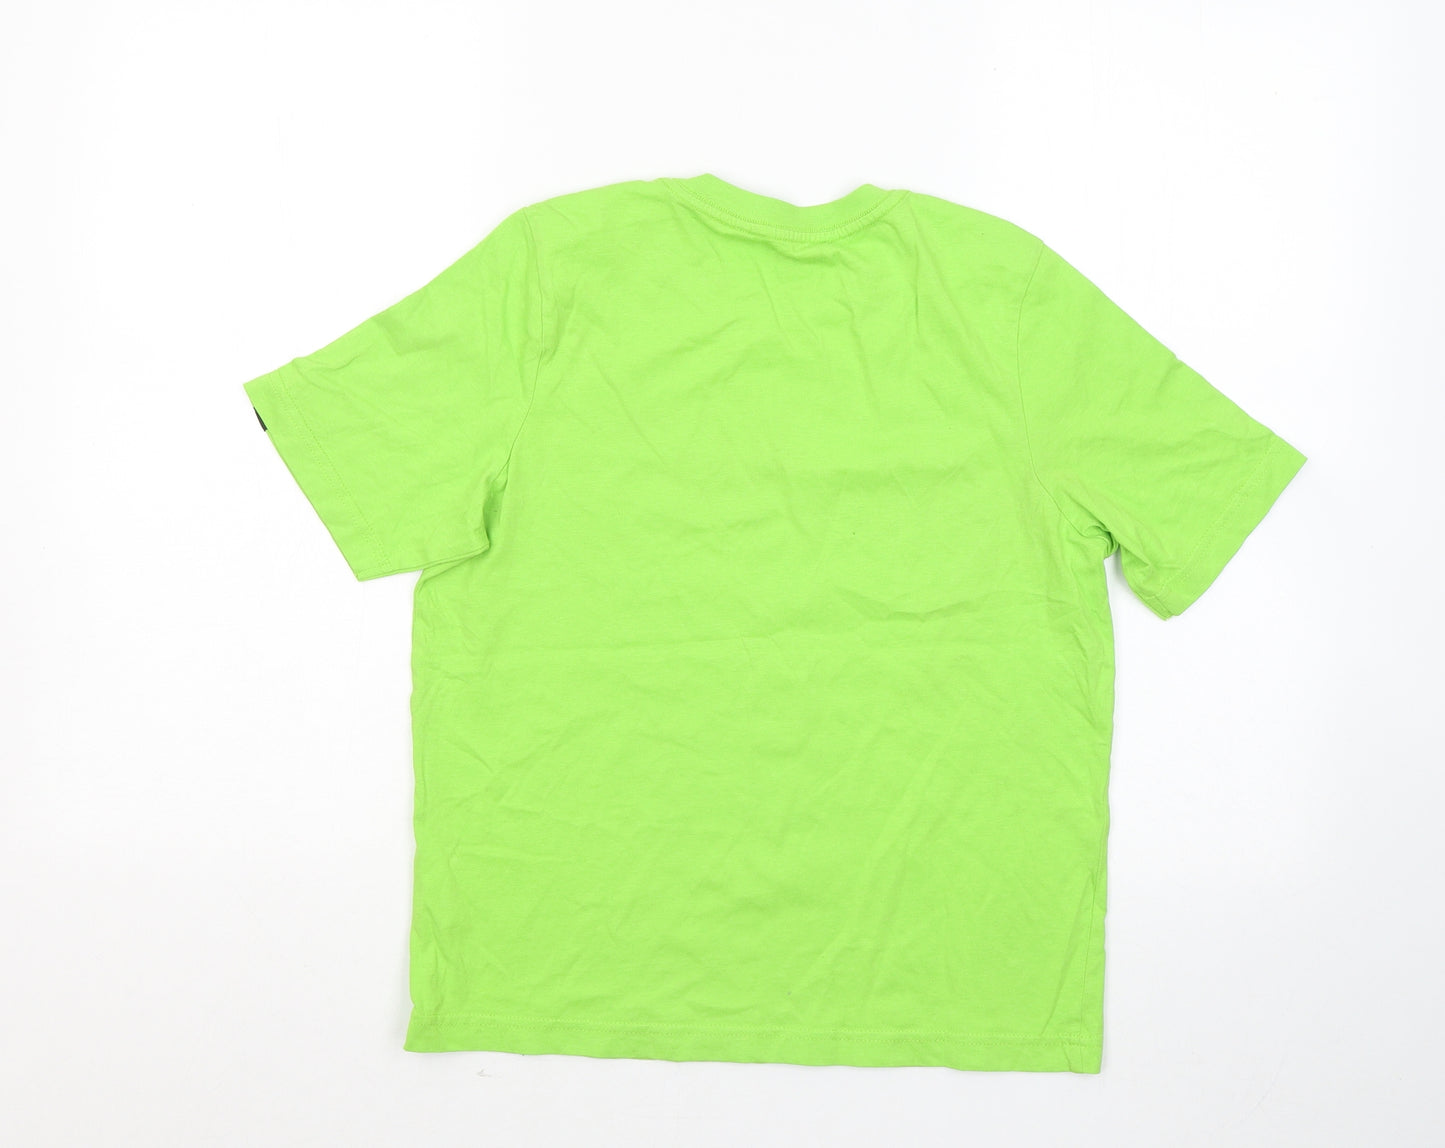 No Fear Boys Green Cotton Basic T-Shirt Size 13 Years Round Neck